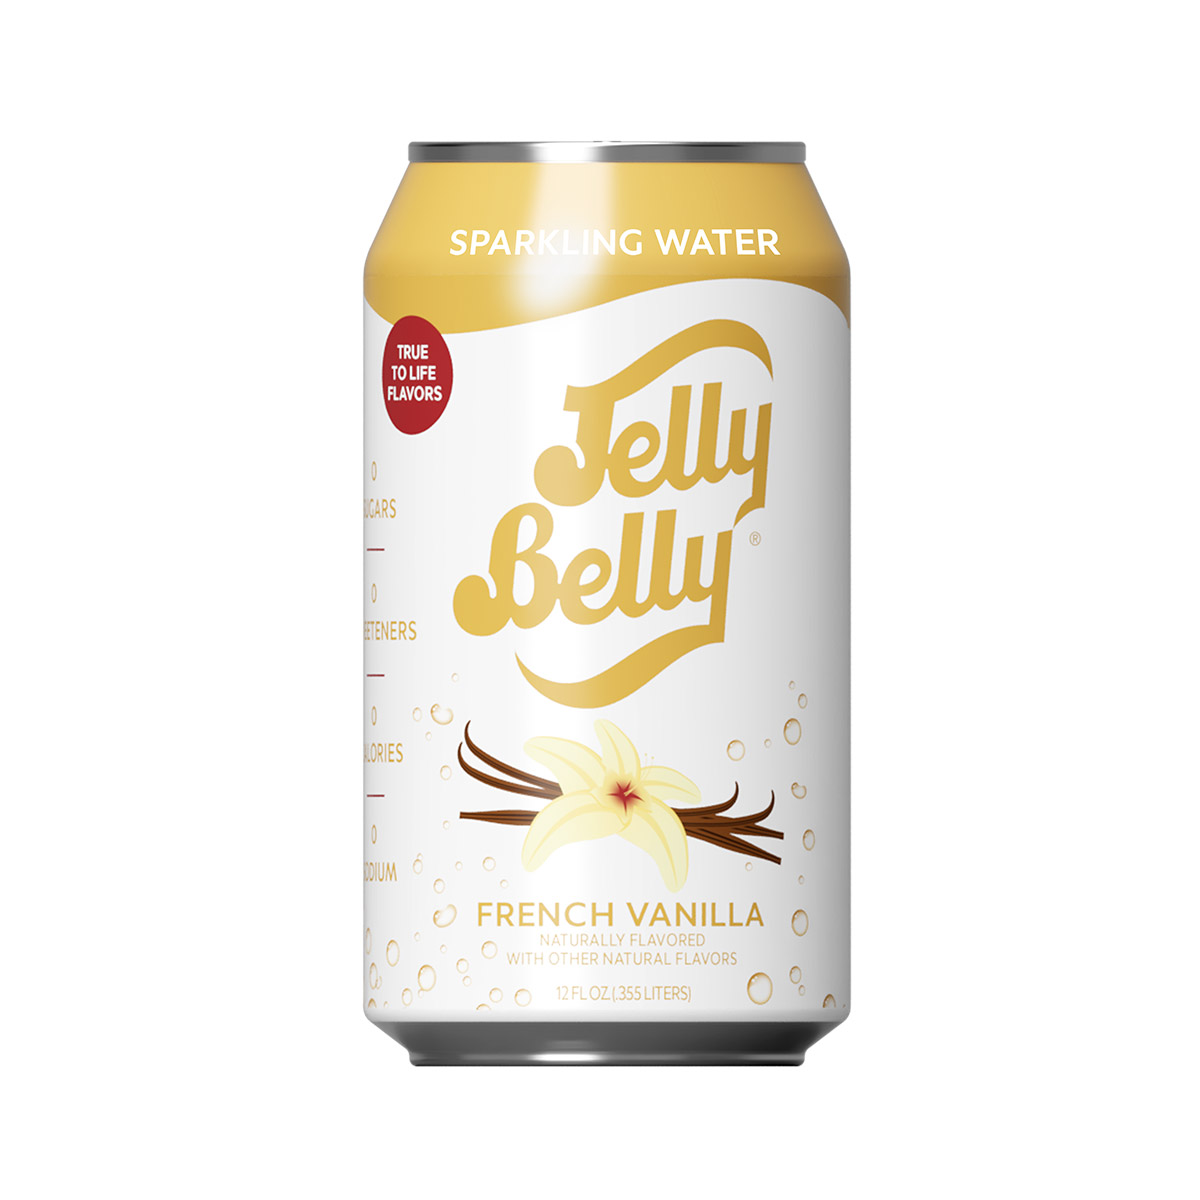 french vanilla jelly belly sparkling water